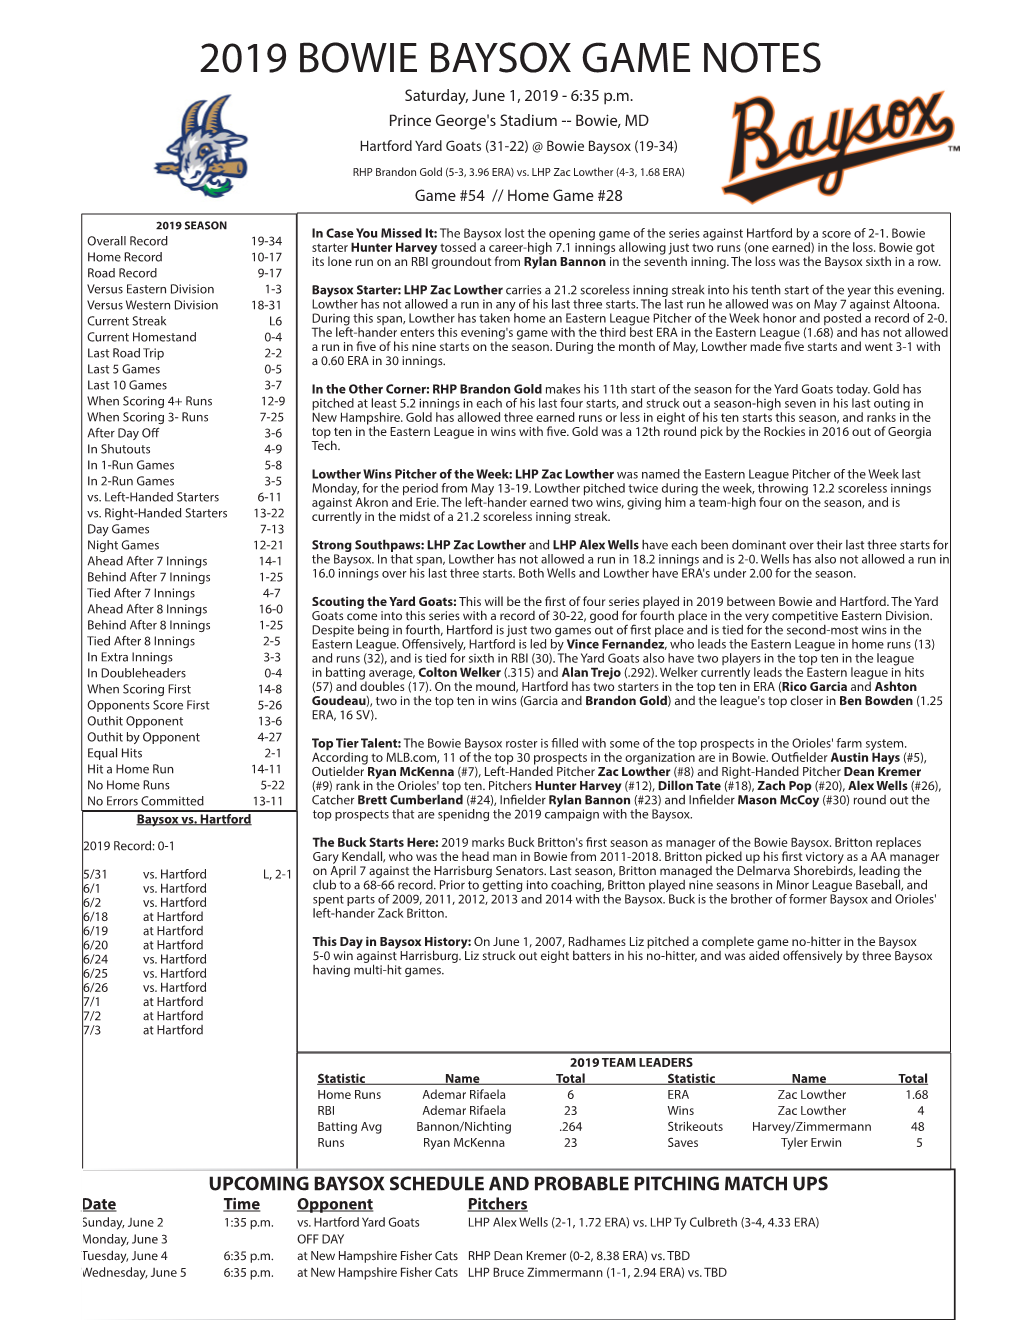 2019 BOWIE BAYSOX GAME NOTES Saturday, June 1, 2019 - 6:35 P.M